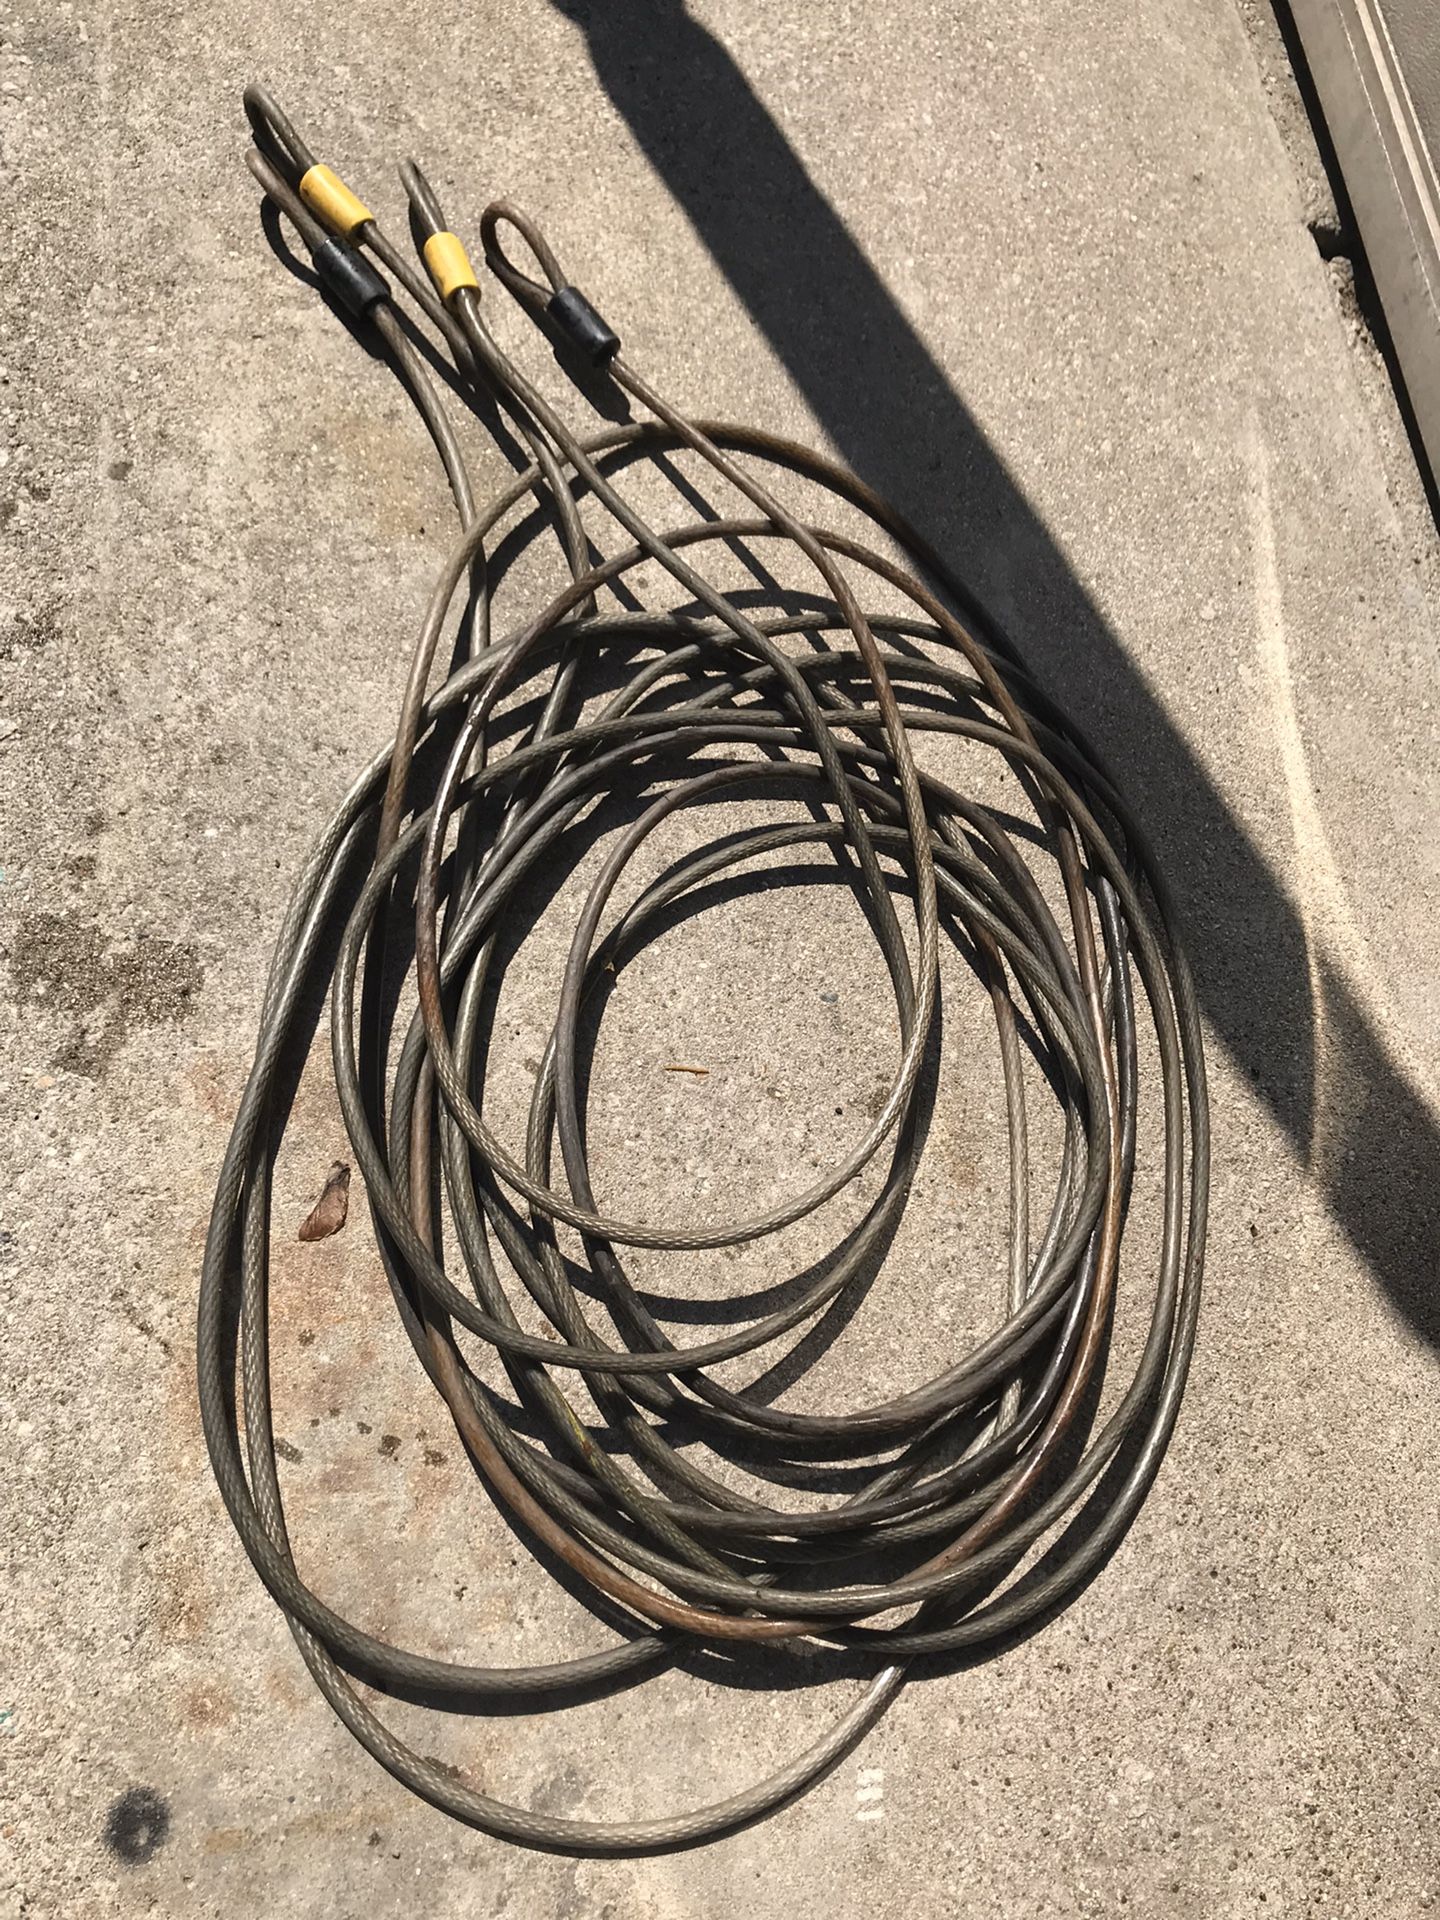 30 foot cables for sale $50 for both